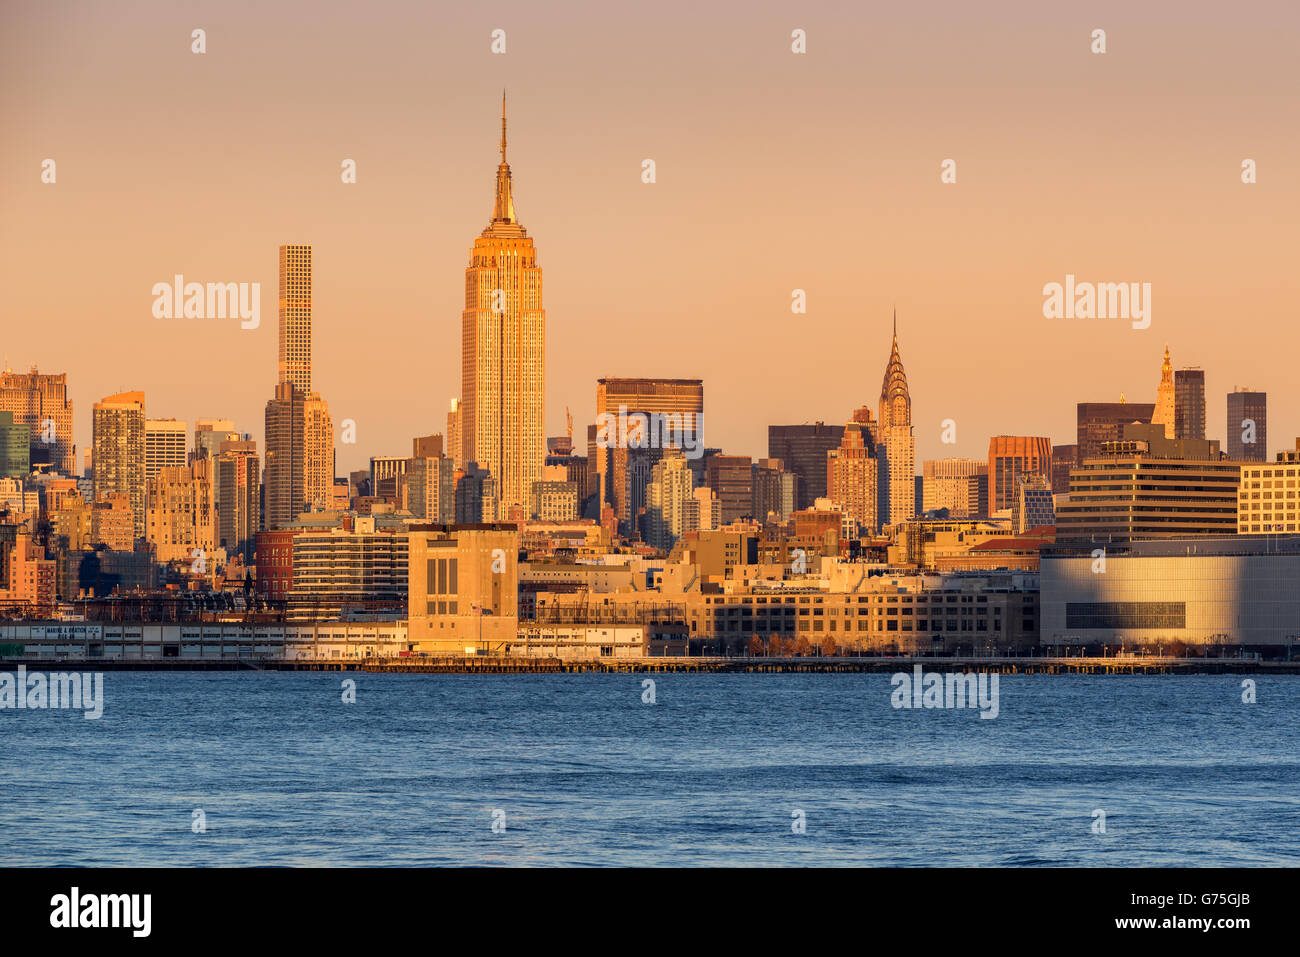 New York City Midtown Manhattan skyscrapers at sunset from across the Hudson River. At center, the Empire State Building. Stock Photo